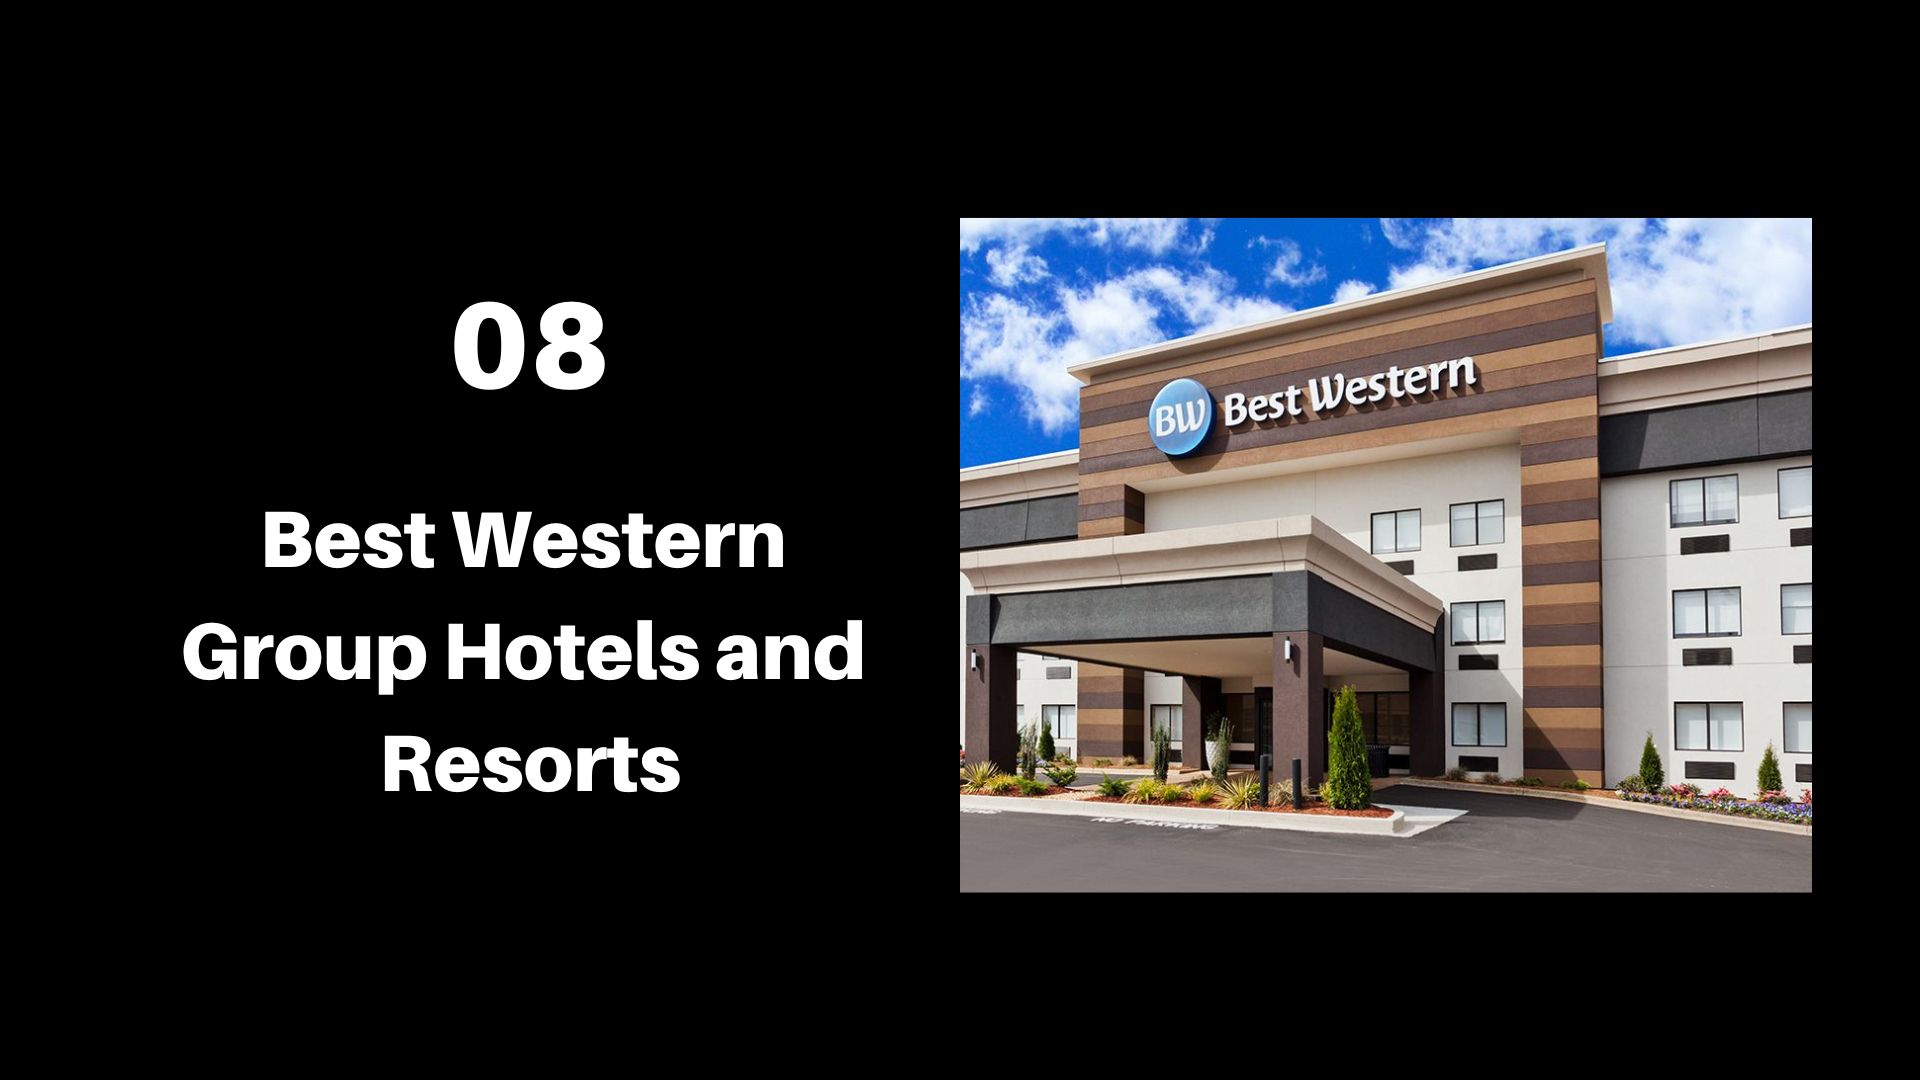 Best Western Group Hotels and Resorts